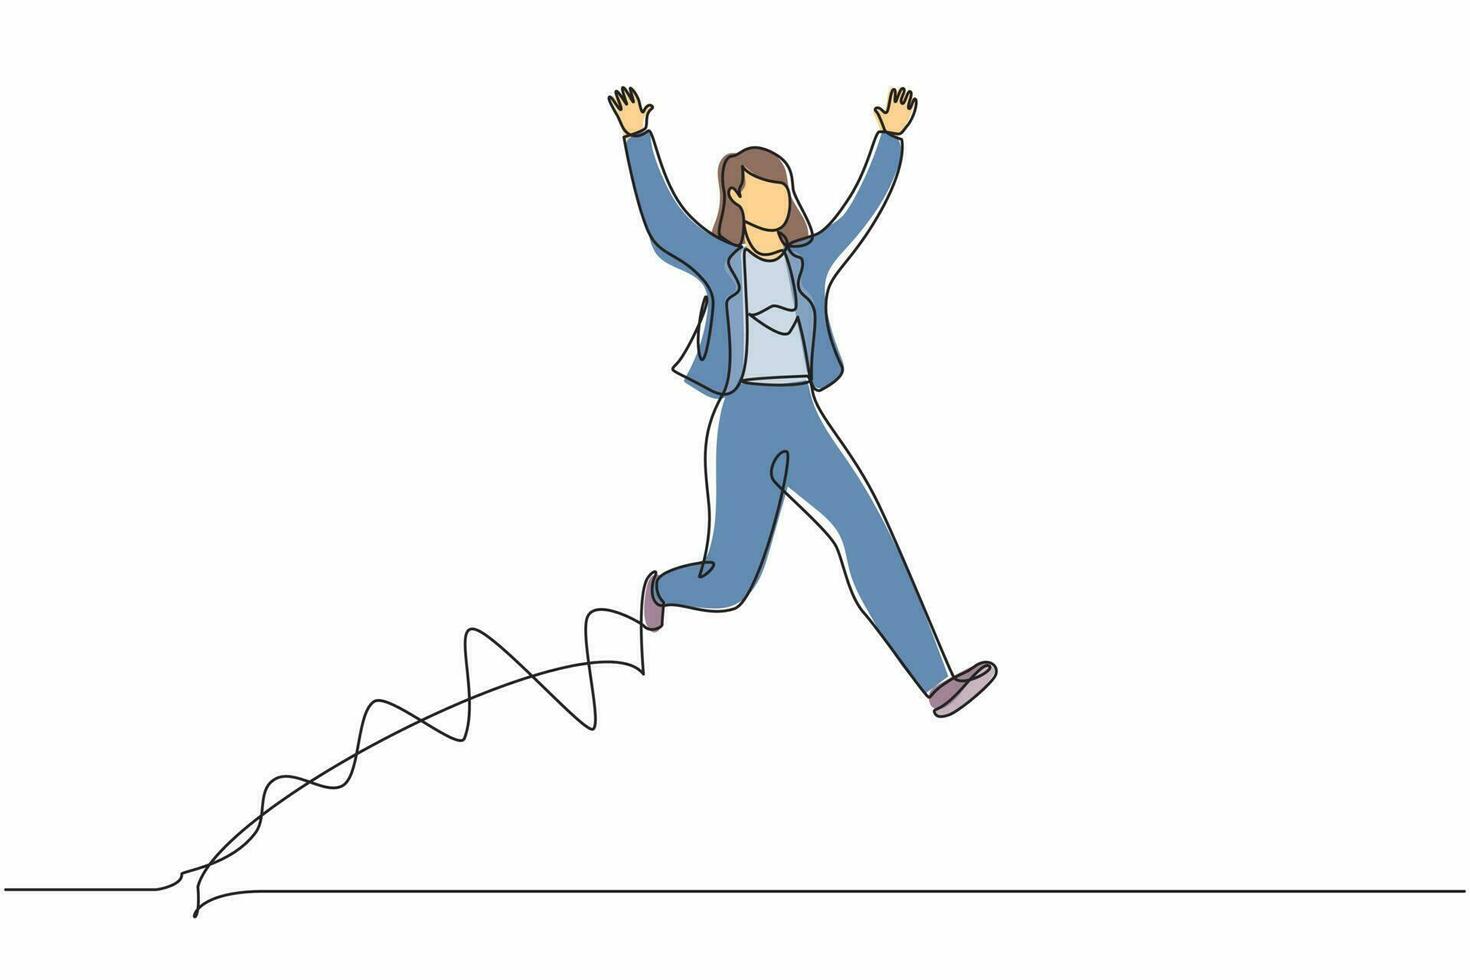 Single continuous line drawing happy businesswoman jump with both hands raised. Young saleswoman celebrates salary increase and benefits from company. One line draw graphic design vector illustration